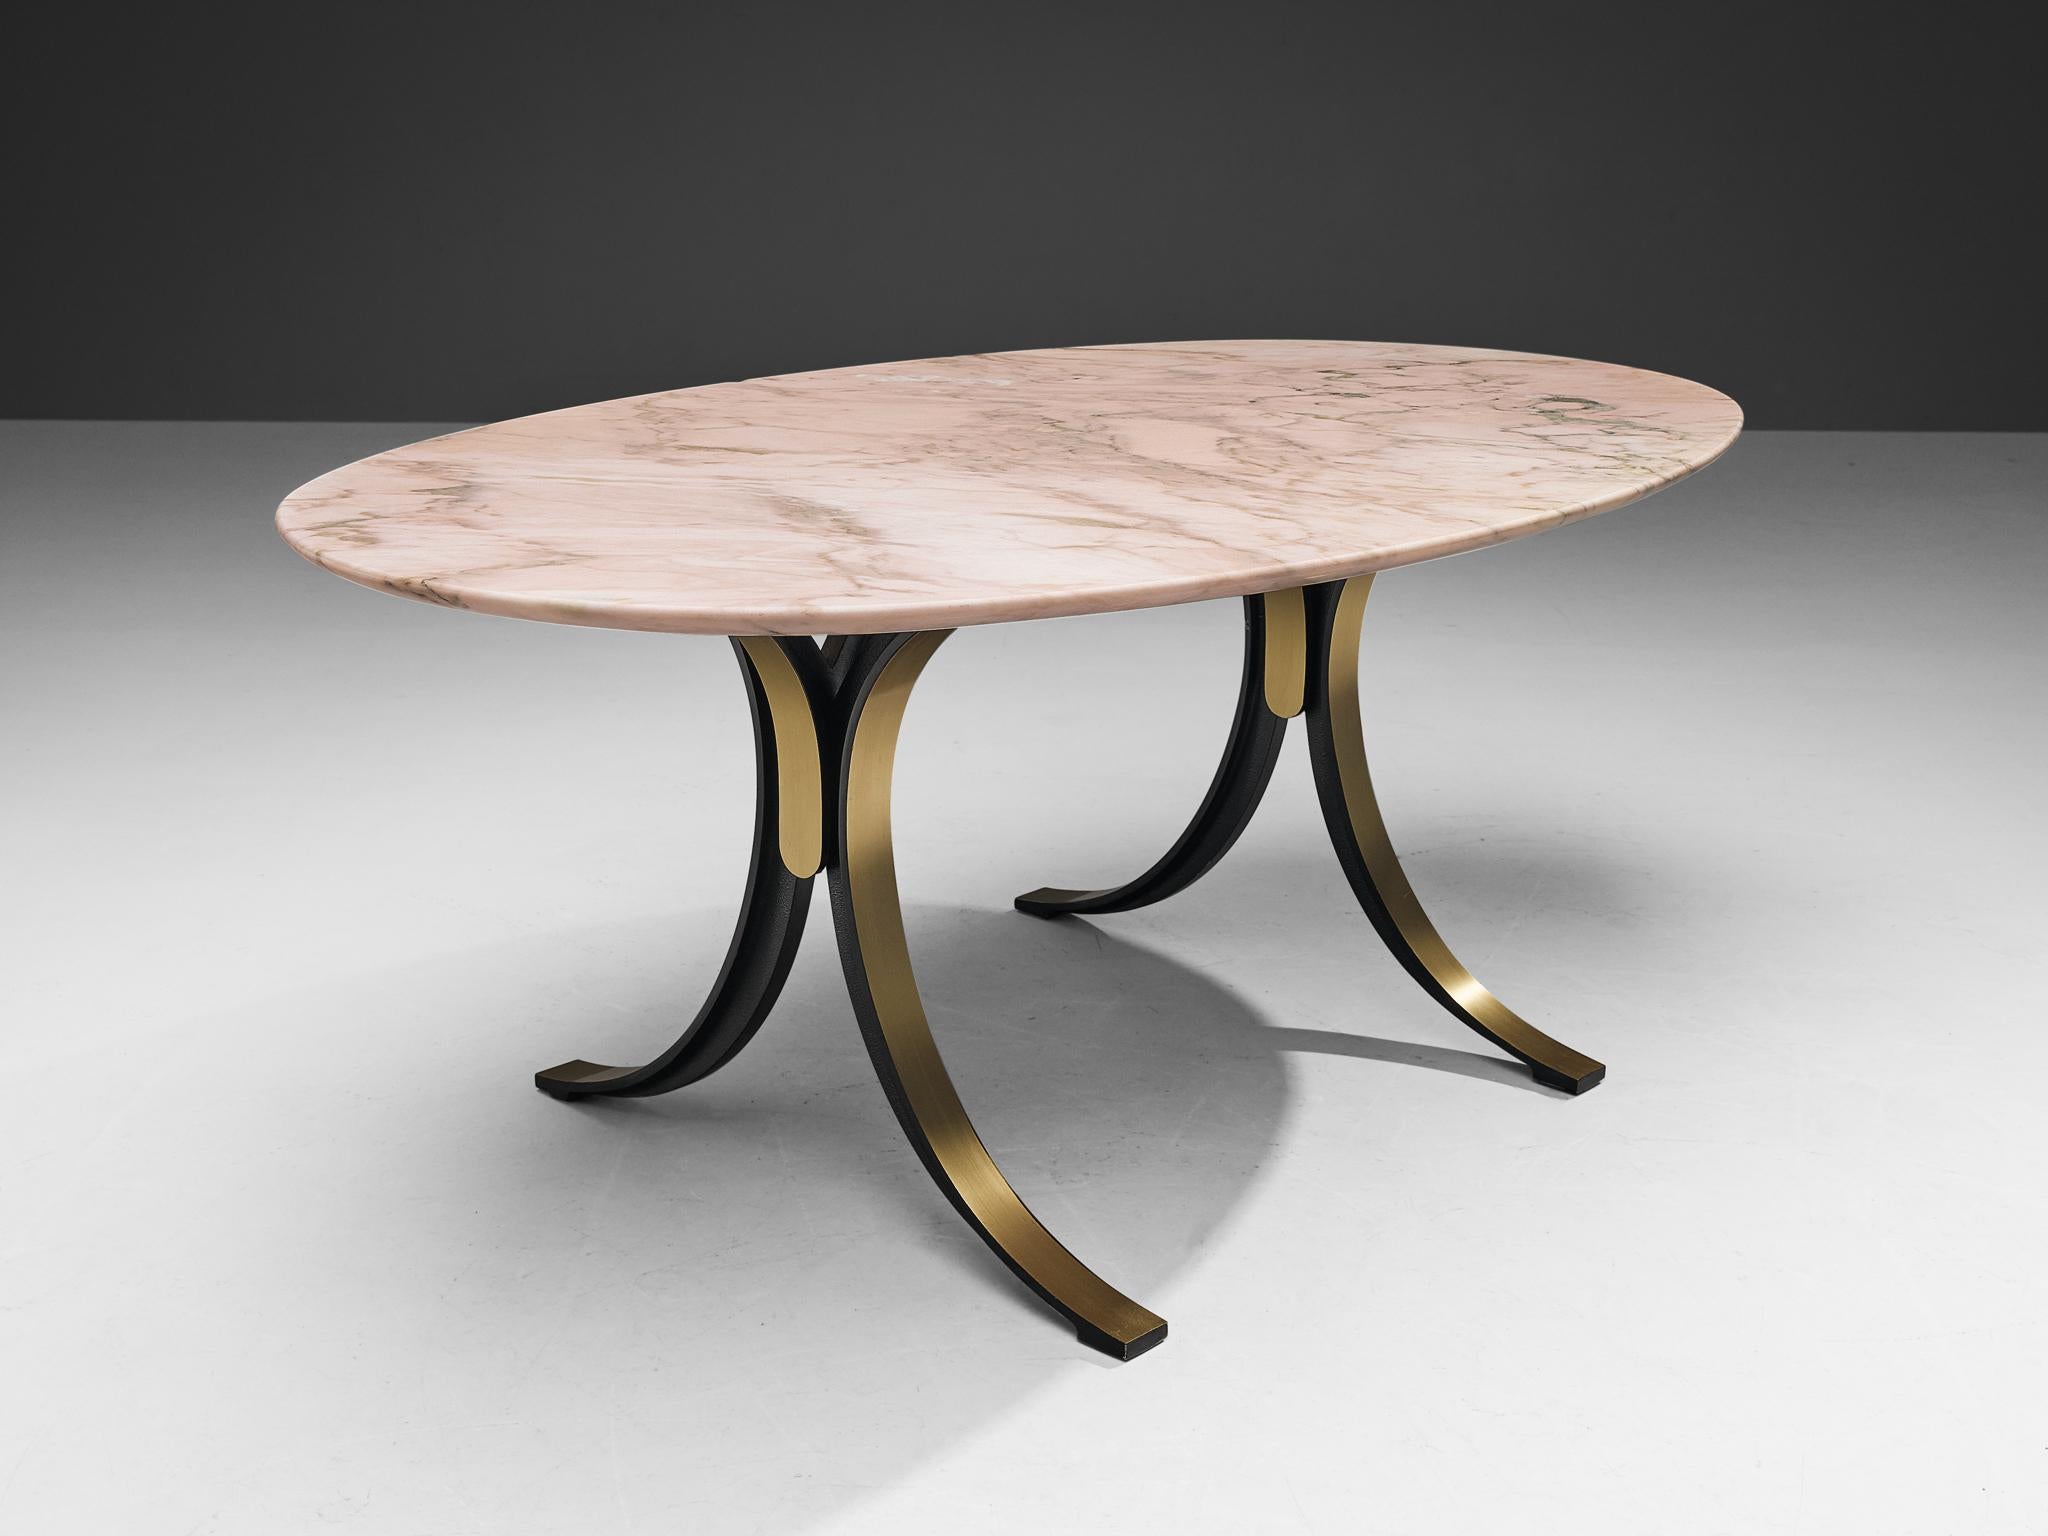 Osvaldo Borsani and Eugenio Gerli for Tecno, dining table 'T 102', lady onyx marble, brass-plated steel, Italy, 1968

This elegant pink is designed by Osvaldo Borsani and Eugenio Gerli for Tecno in the 1960s. The marble top shows amazing veins in